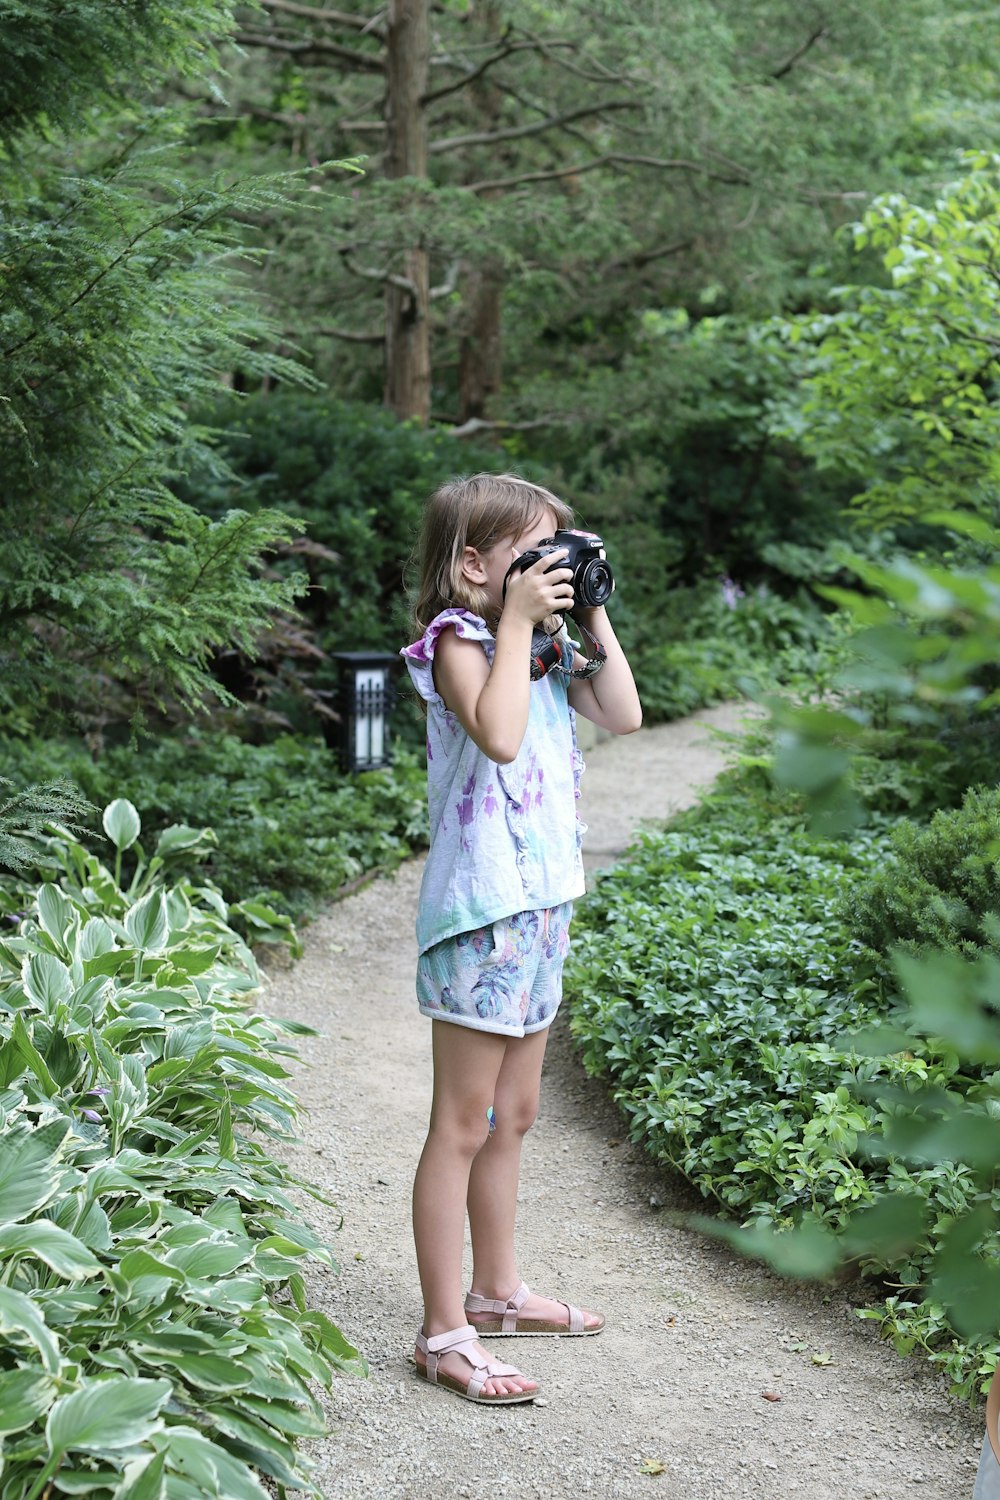 a girl taking a picture with a camera